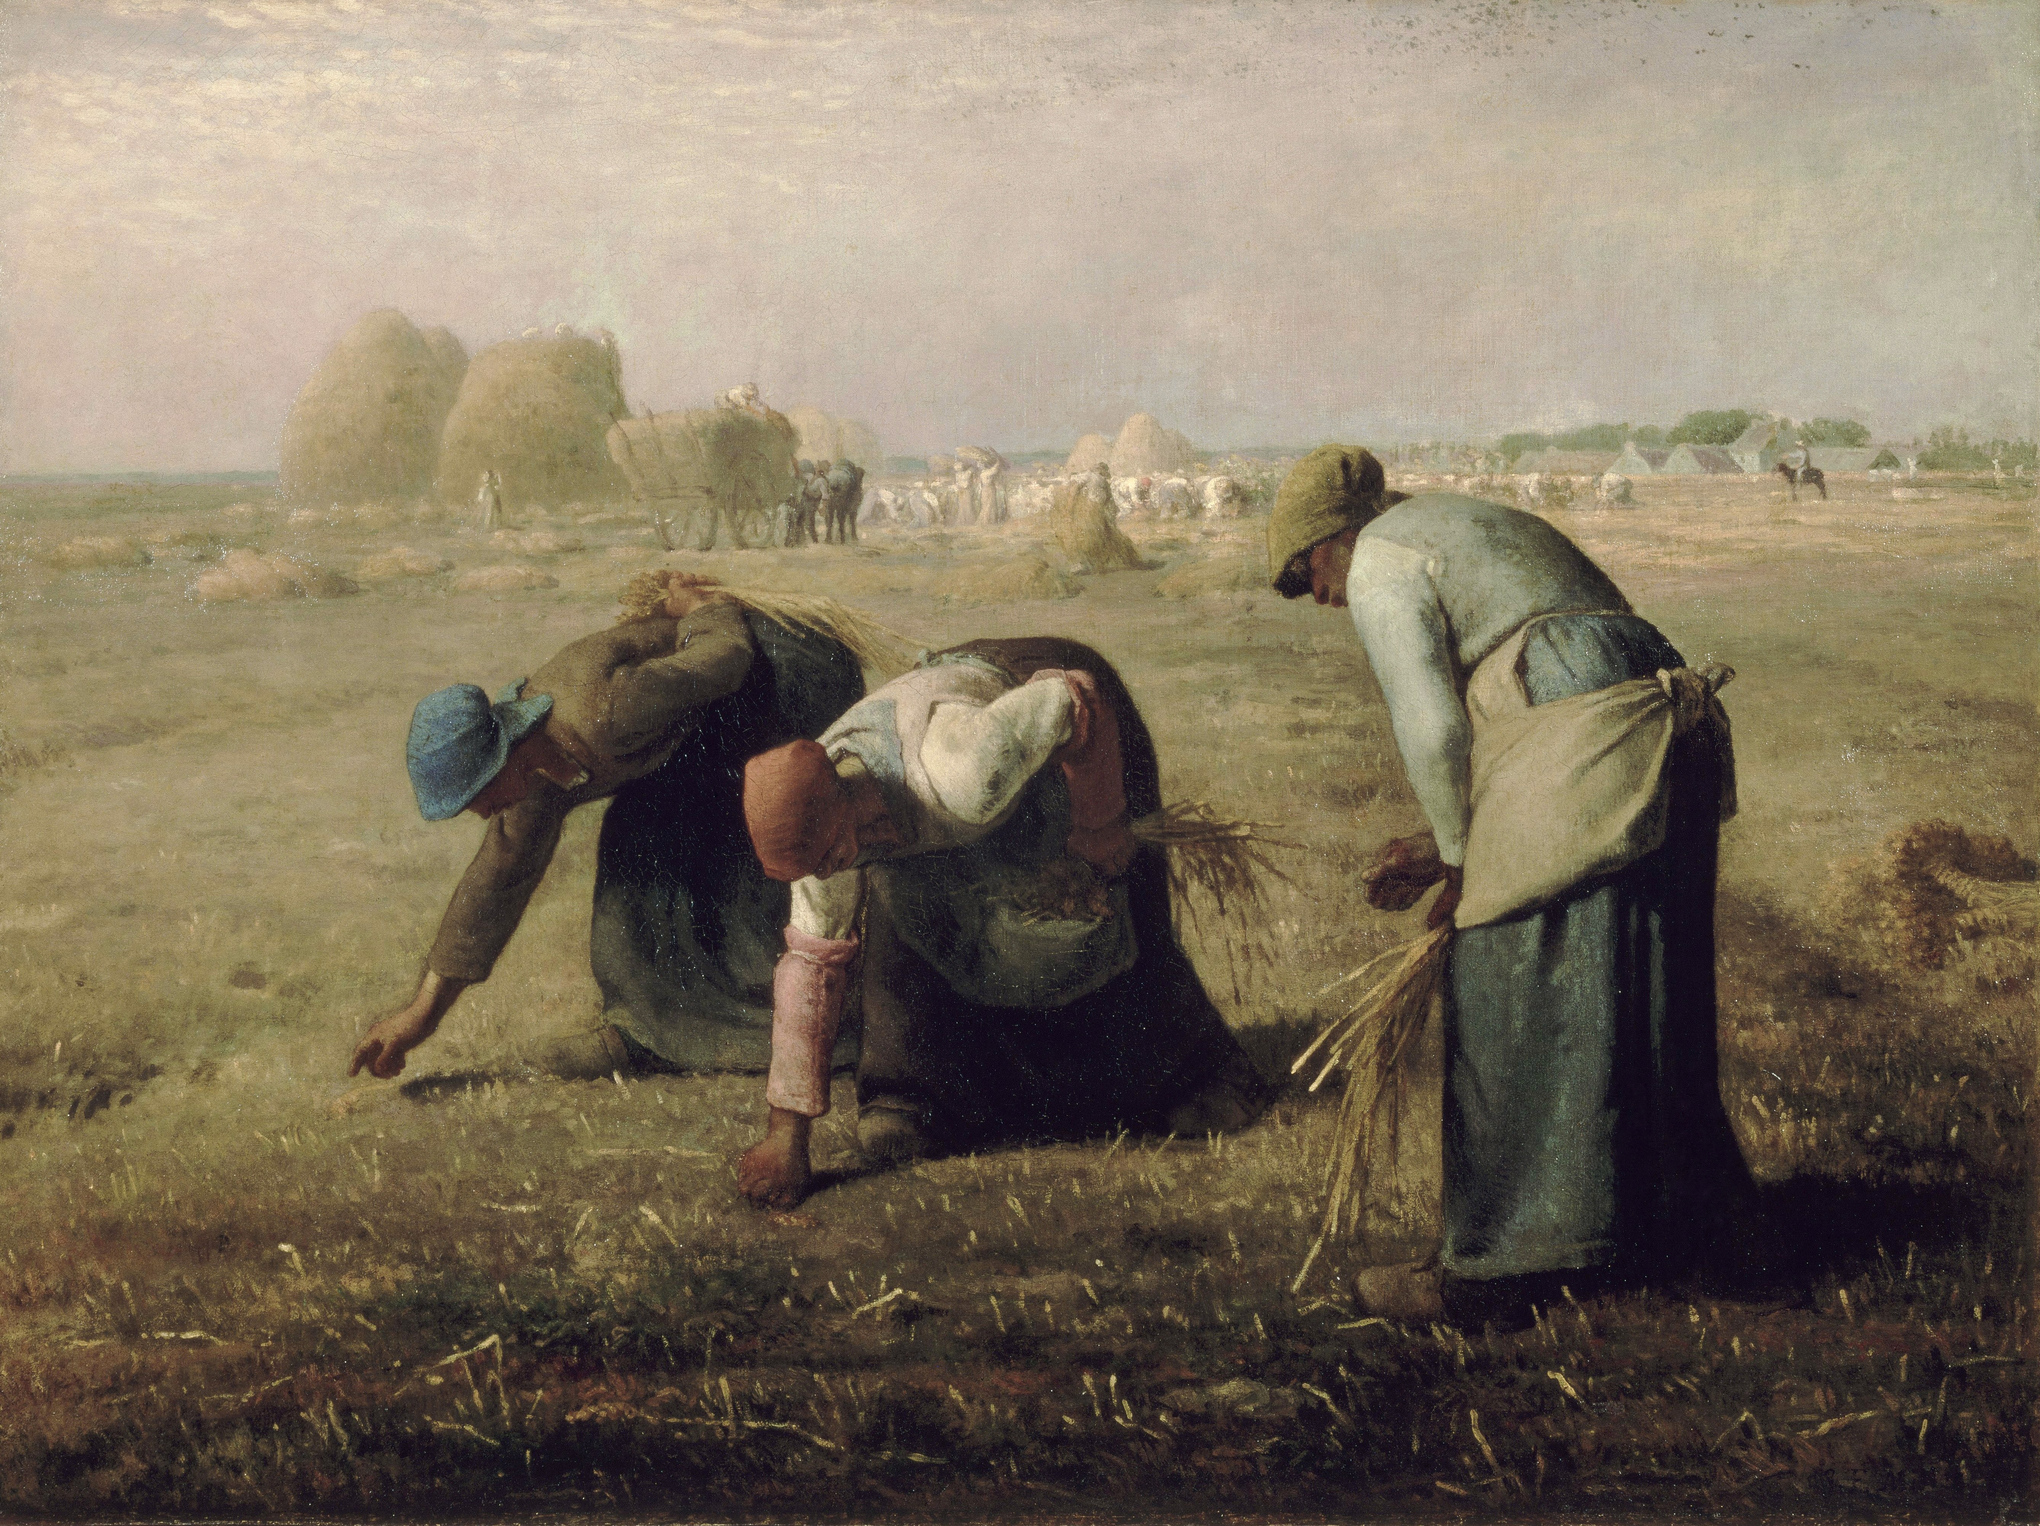 Jean-francois-millet-the-gleaners-1857